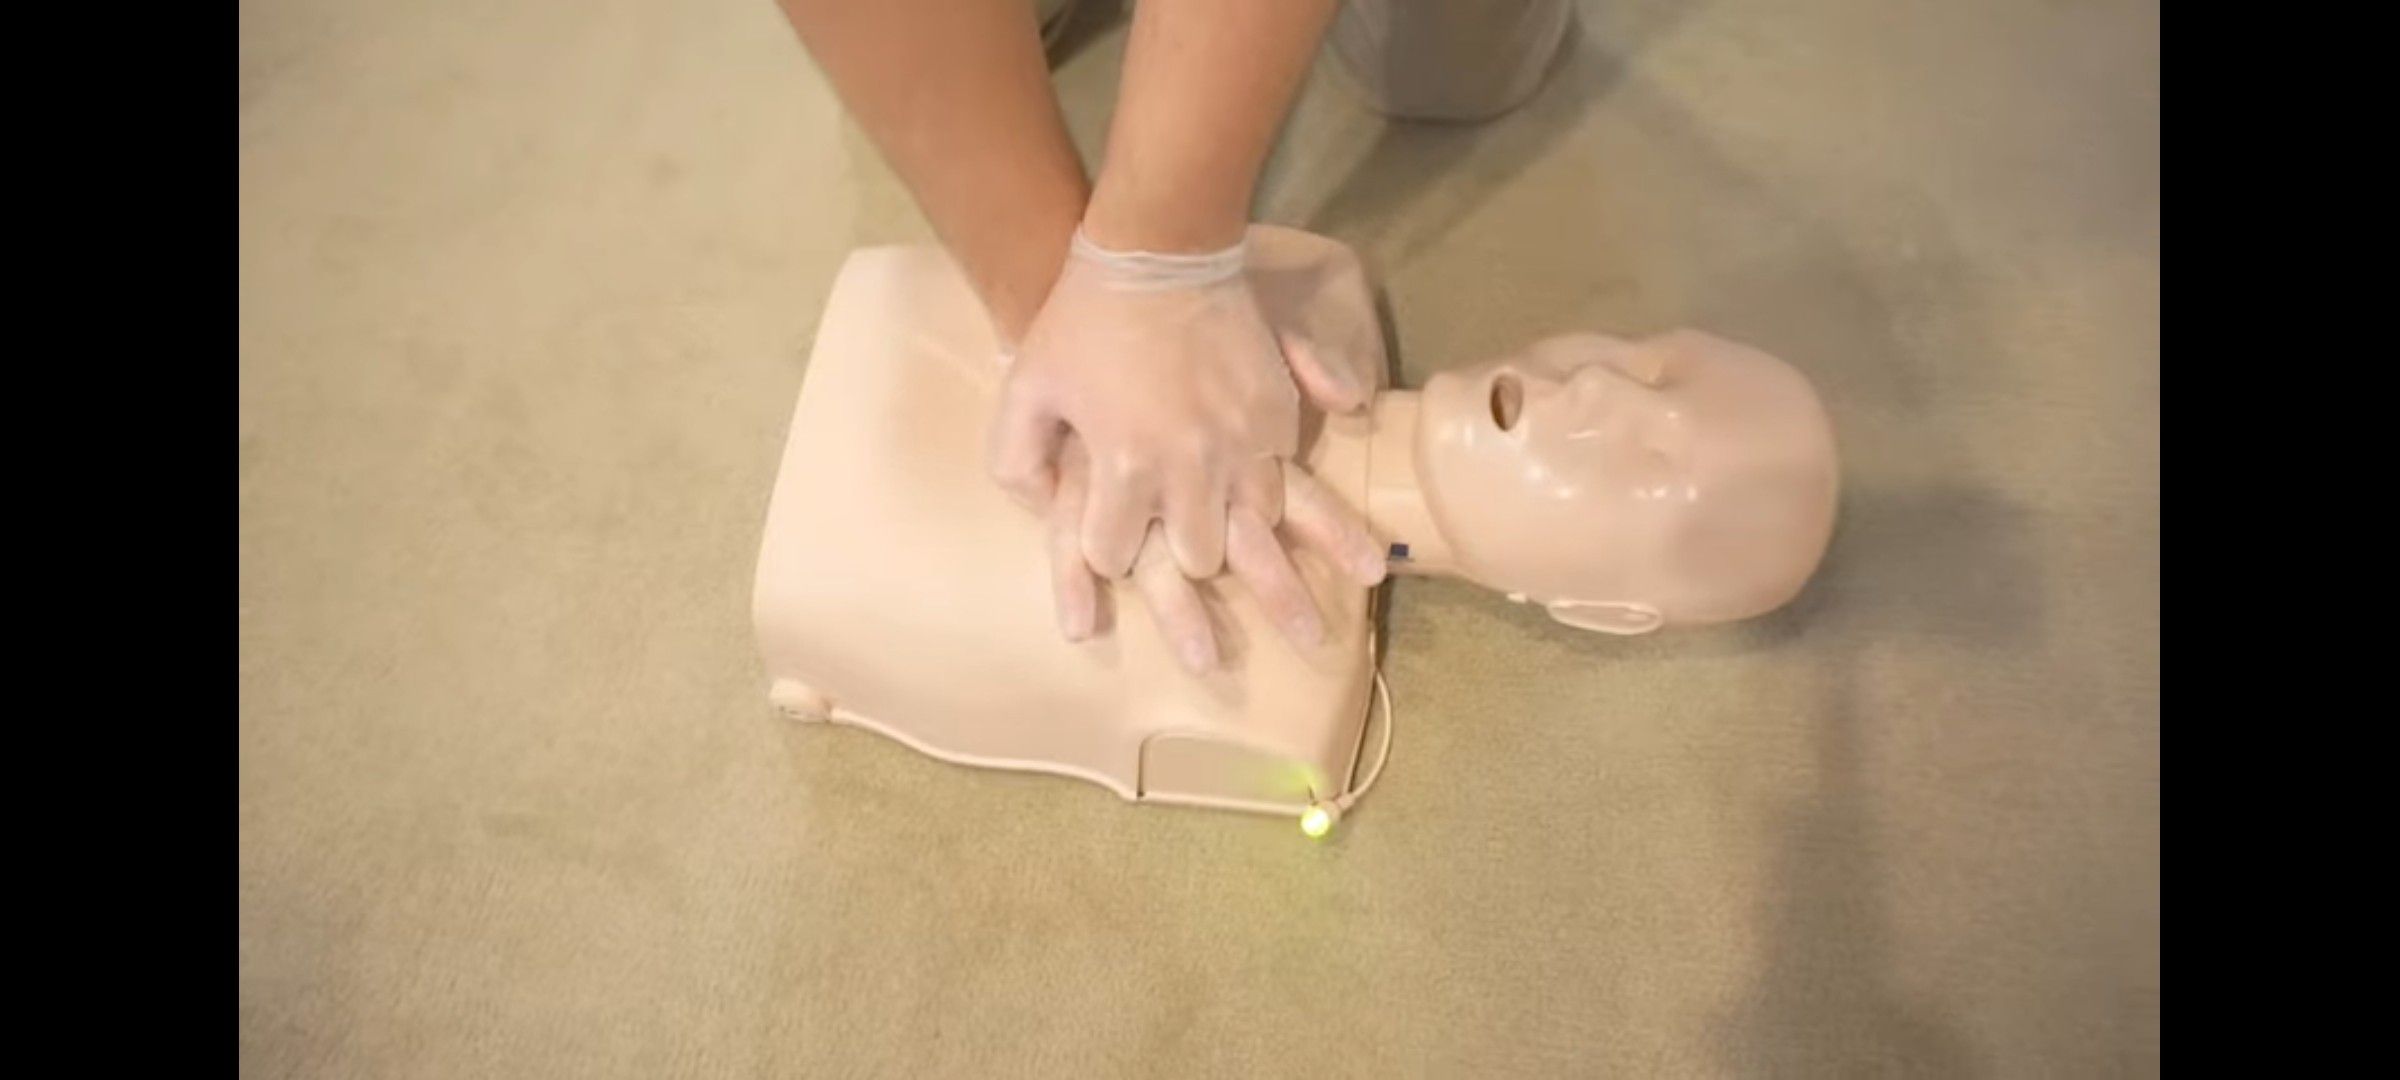 BLS, CPR, First Aid Classes